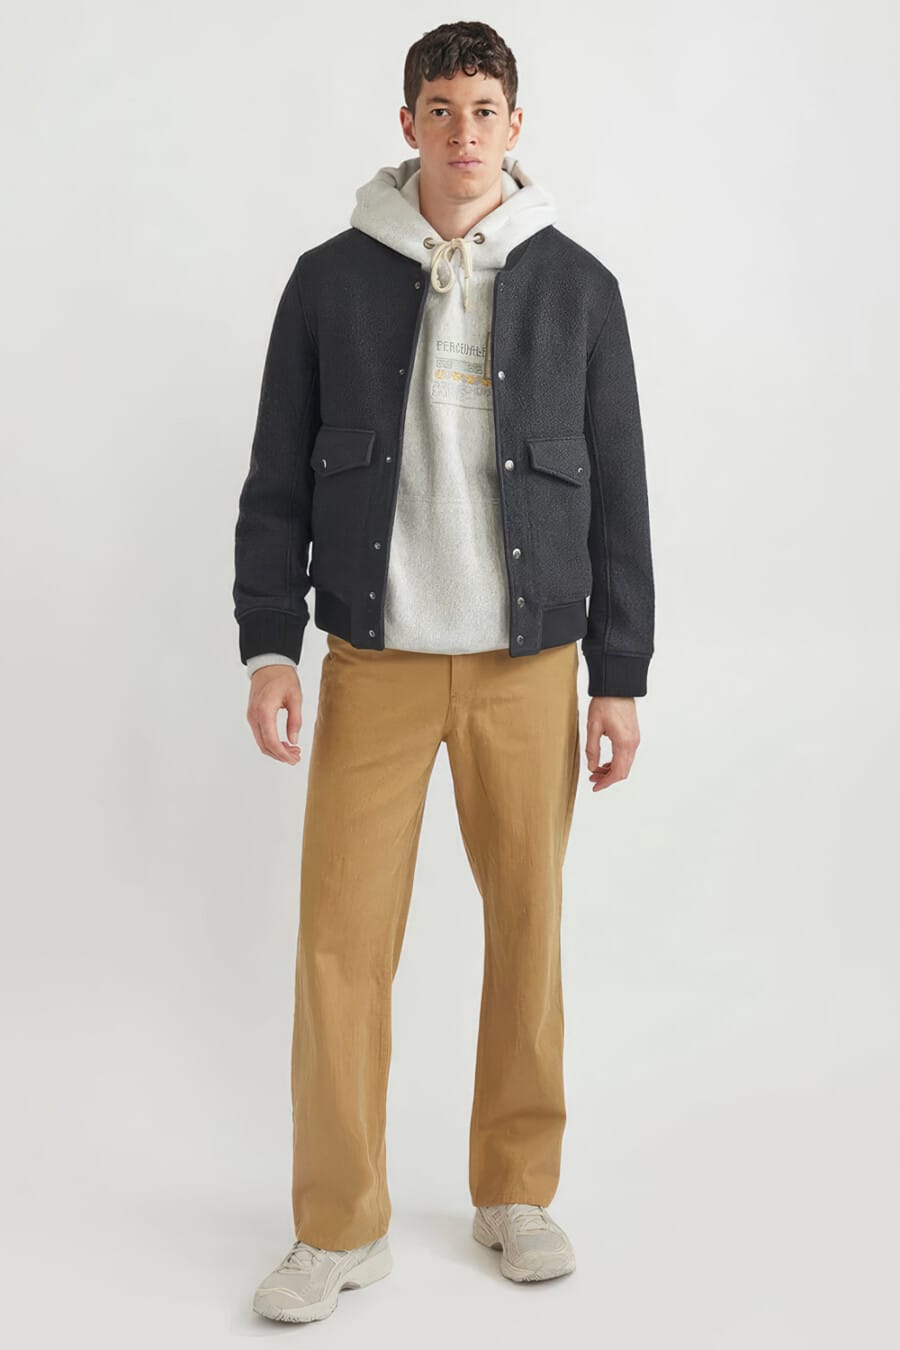 Men's khaki pants, grey hoodie, navy wool bomber jacket and grey chunky sneakers outfit